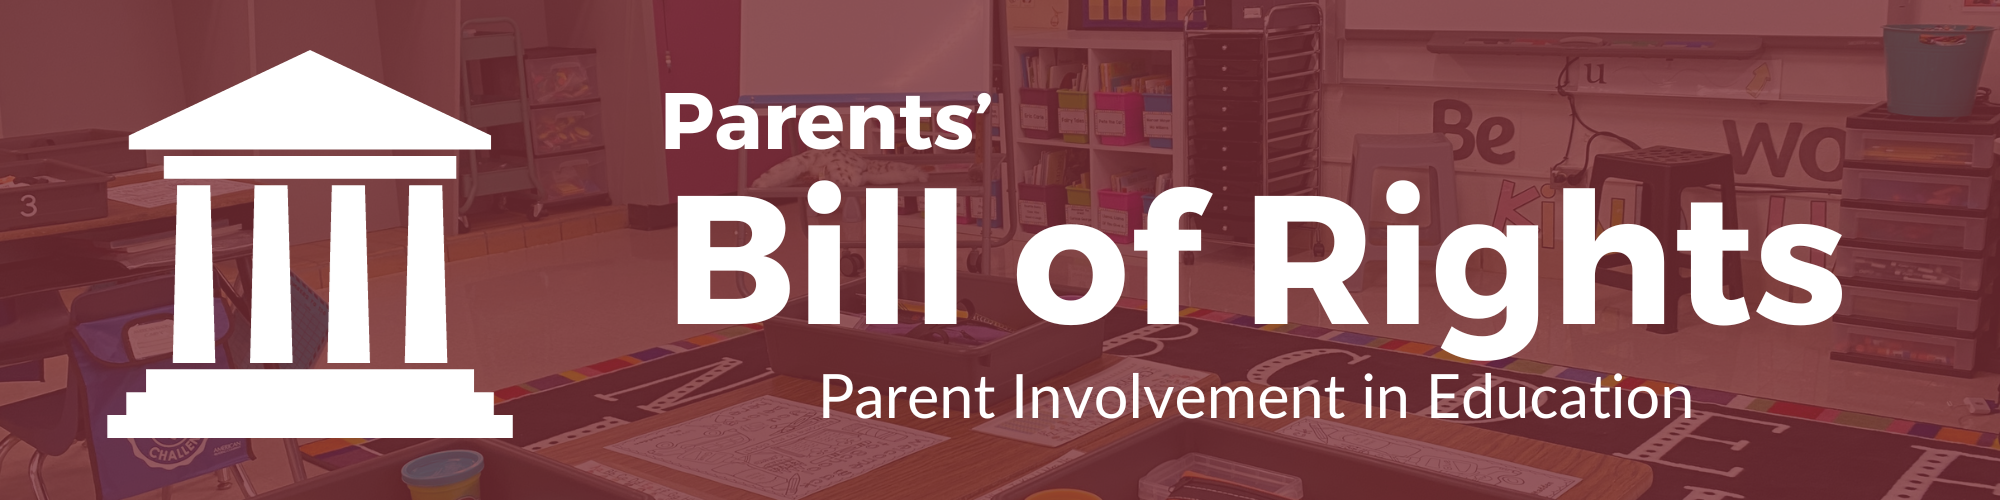 Parents' Bill of Rights Parent Involvement in Education text on burgundy background with faded photograph of classroom